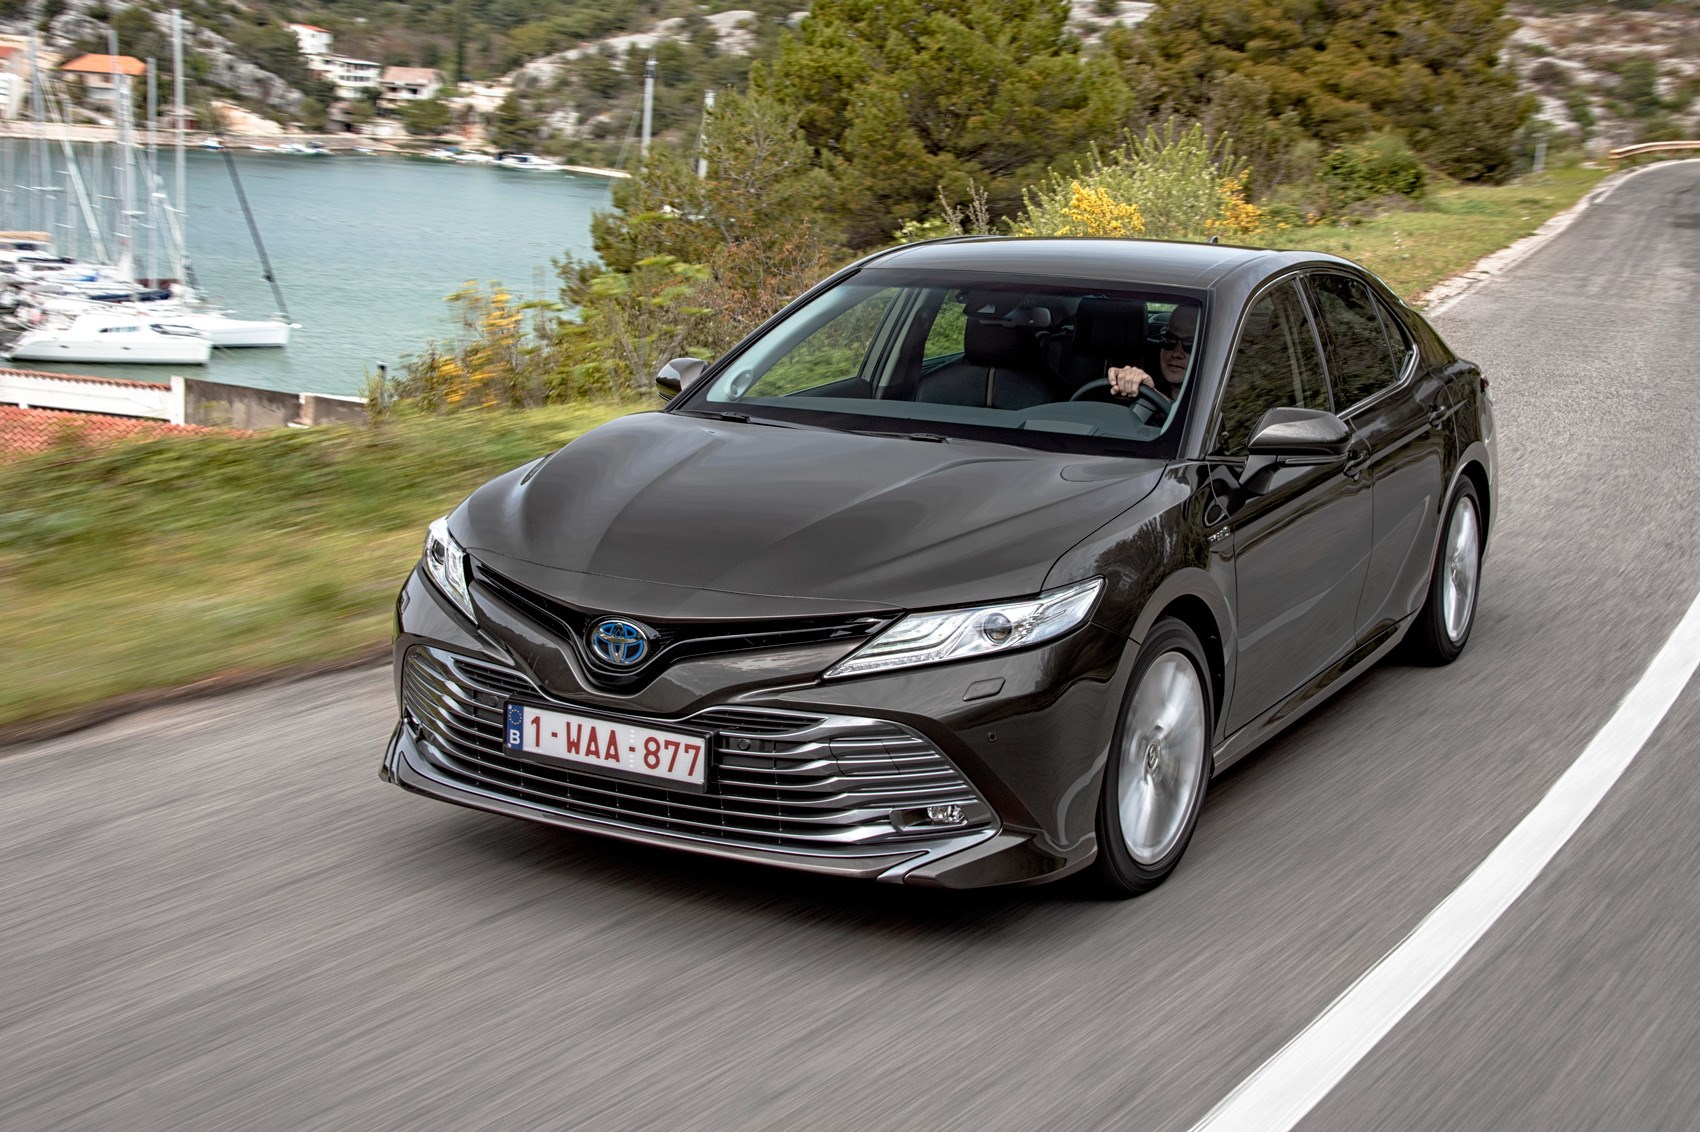 Toyota Camry Saloon (2020) Review | CAR Magazine